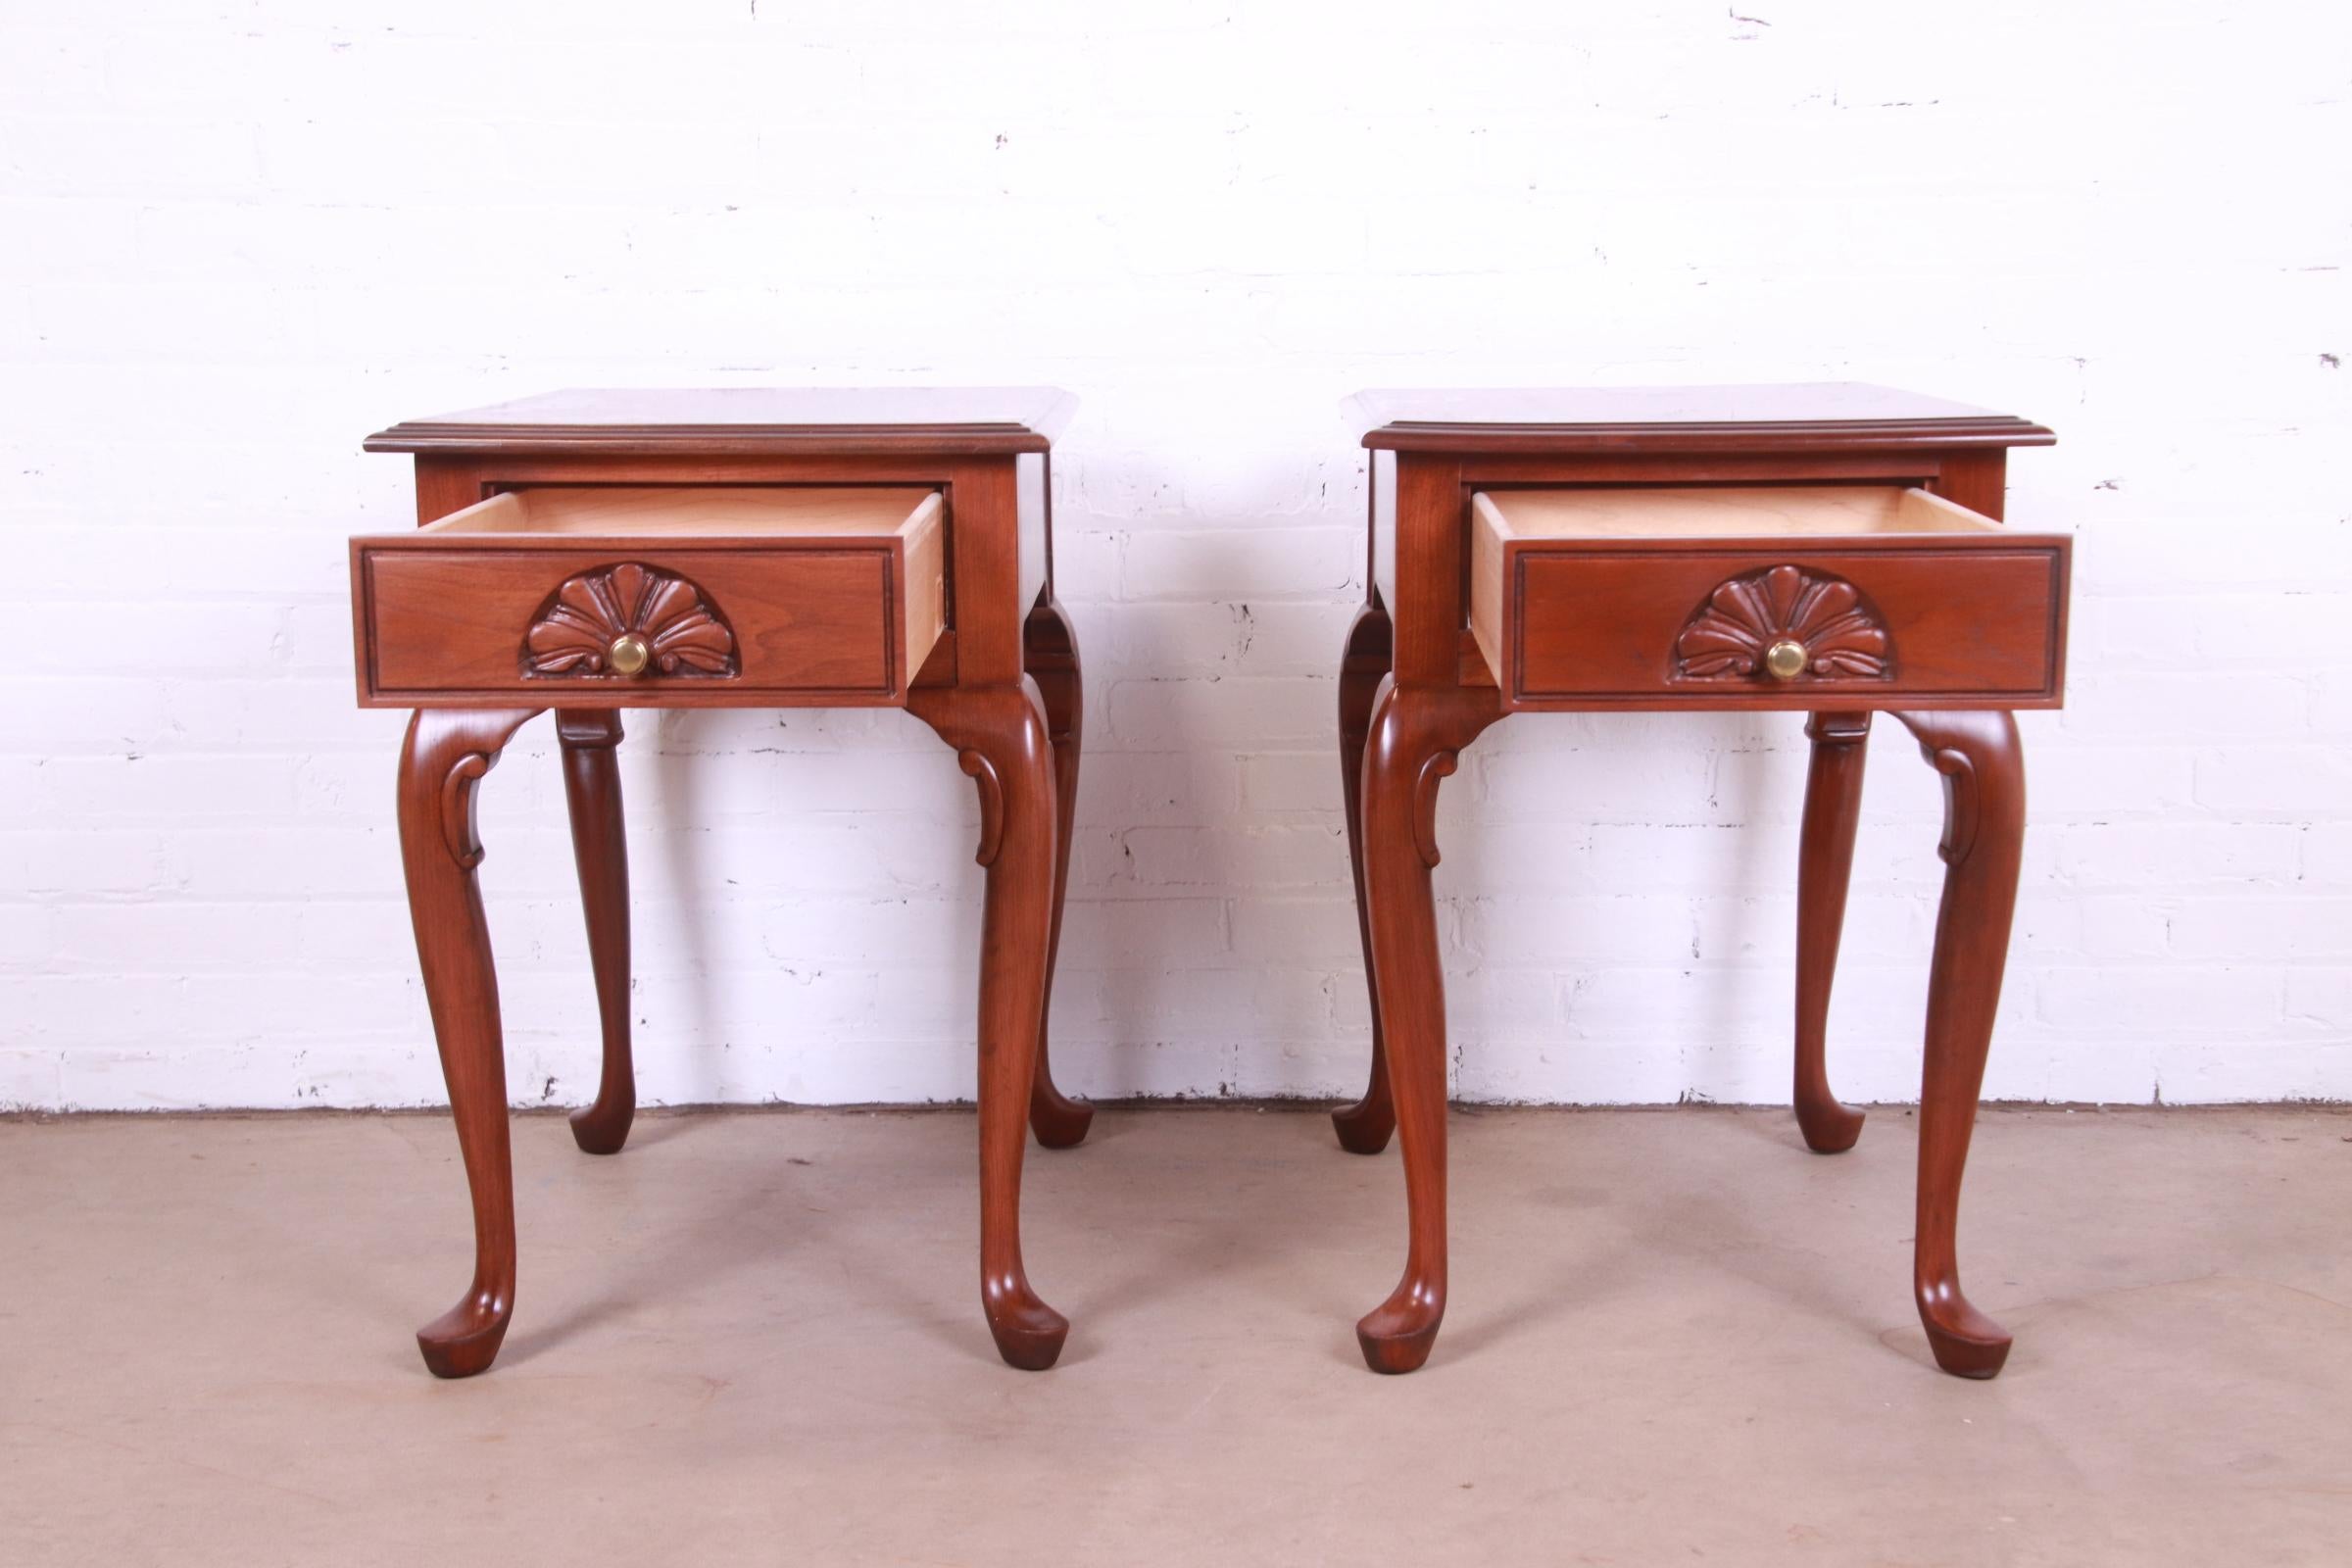 20th Century Harden Furniture Queen Anne Solid Cherry Wood Nightstands or End Tables, Pair For Sale